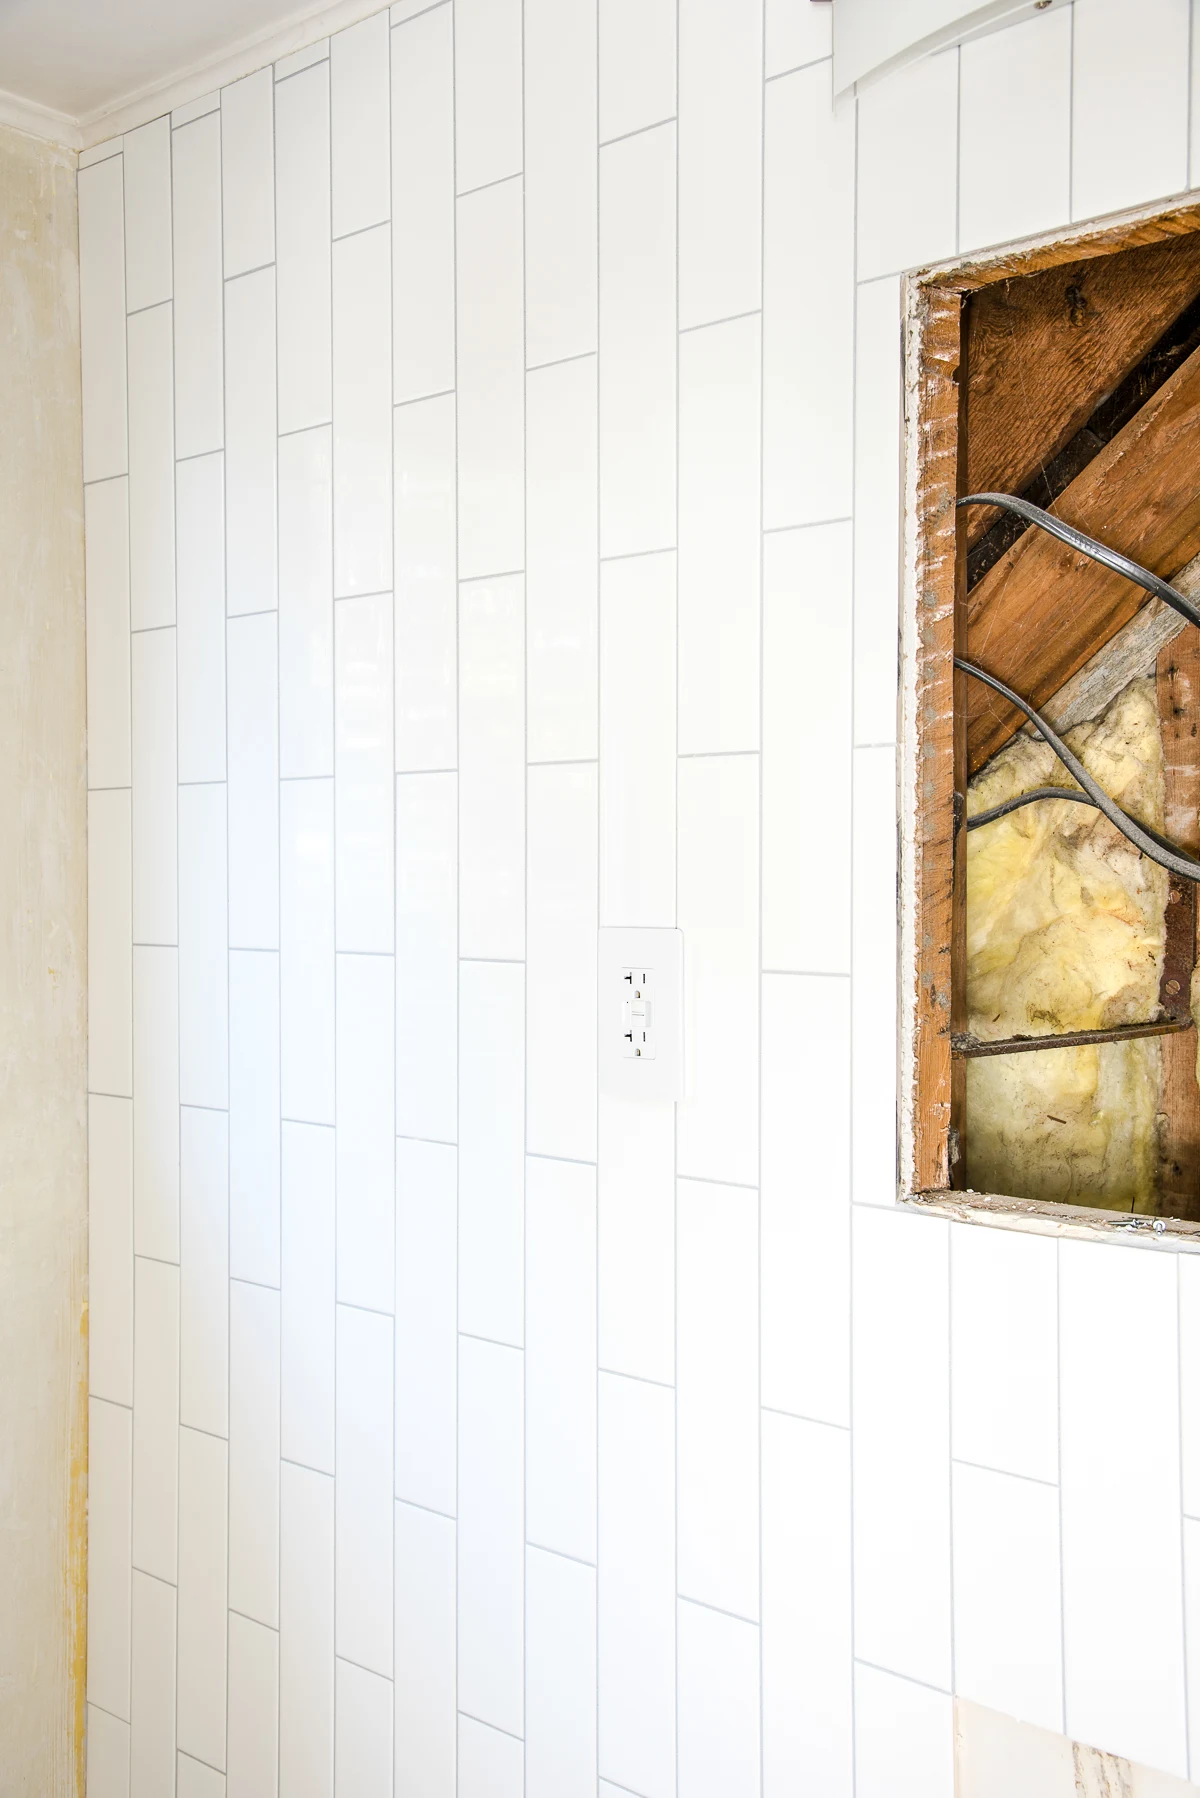 corner of the wall where the vertical subway tile meets the wall with a window